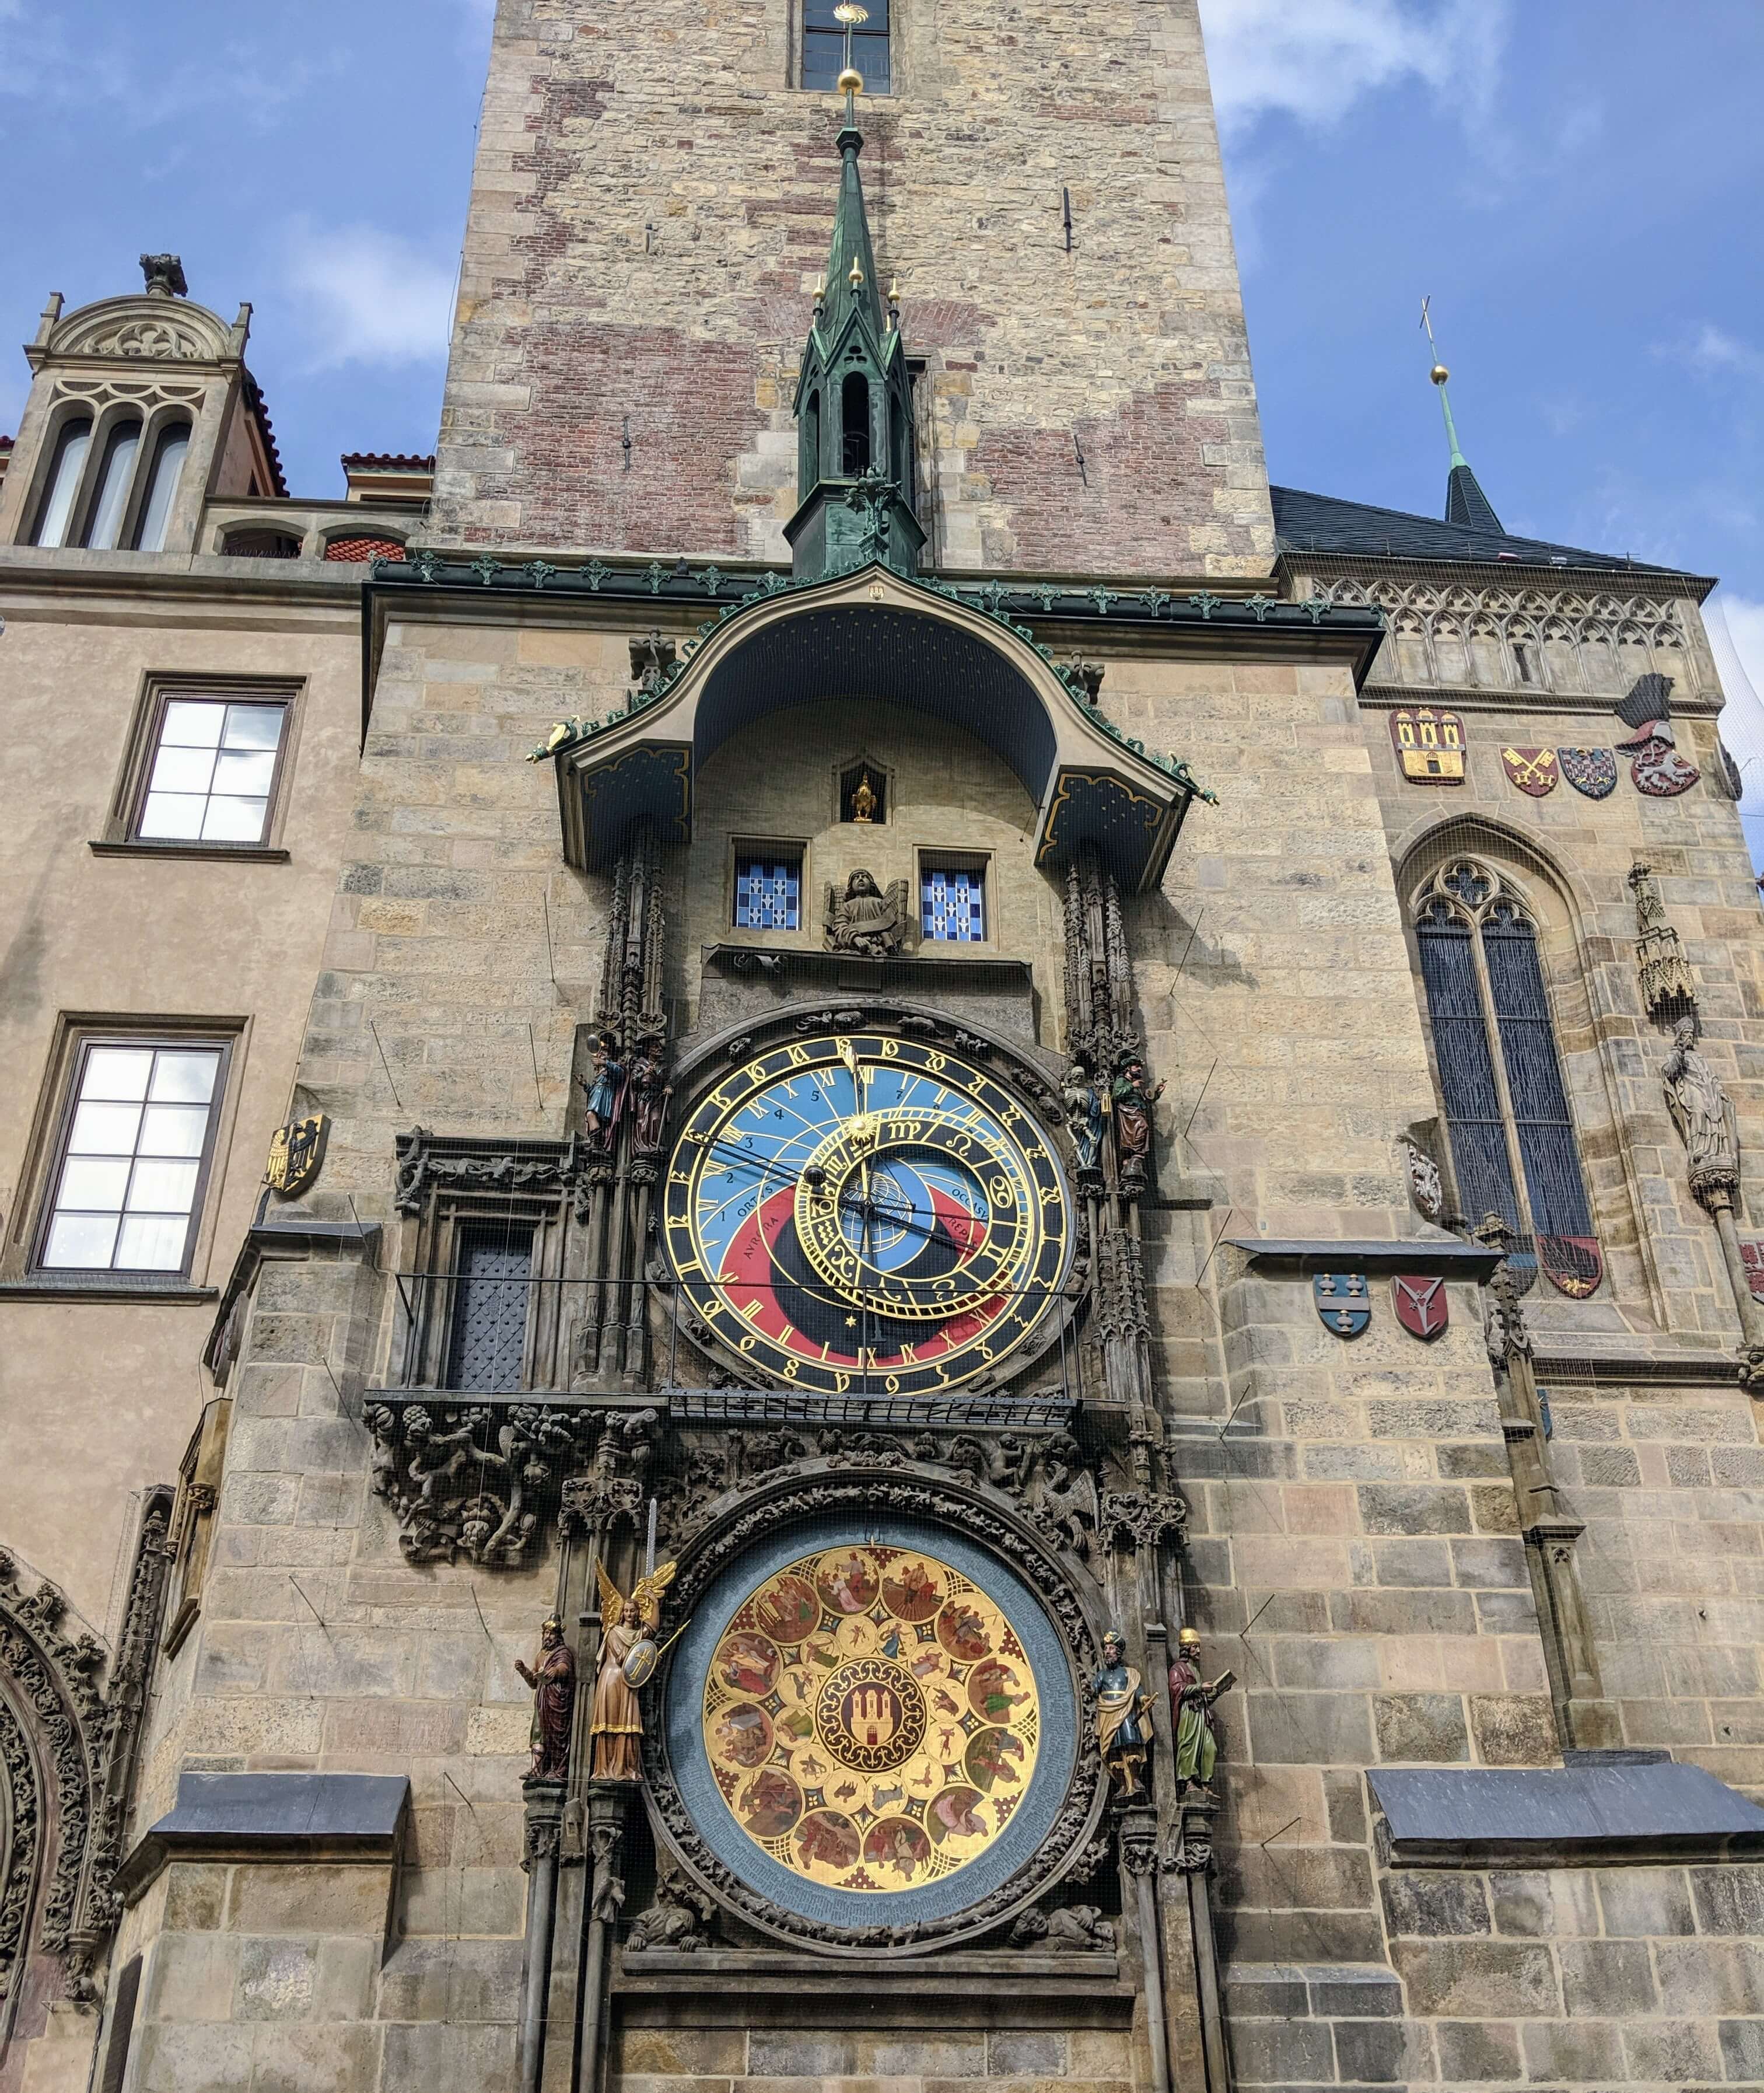 Full View of the Prague Astronomical Clock in 2019, Located in the Old Town Square of The Czech Republic